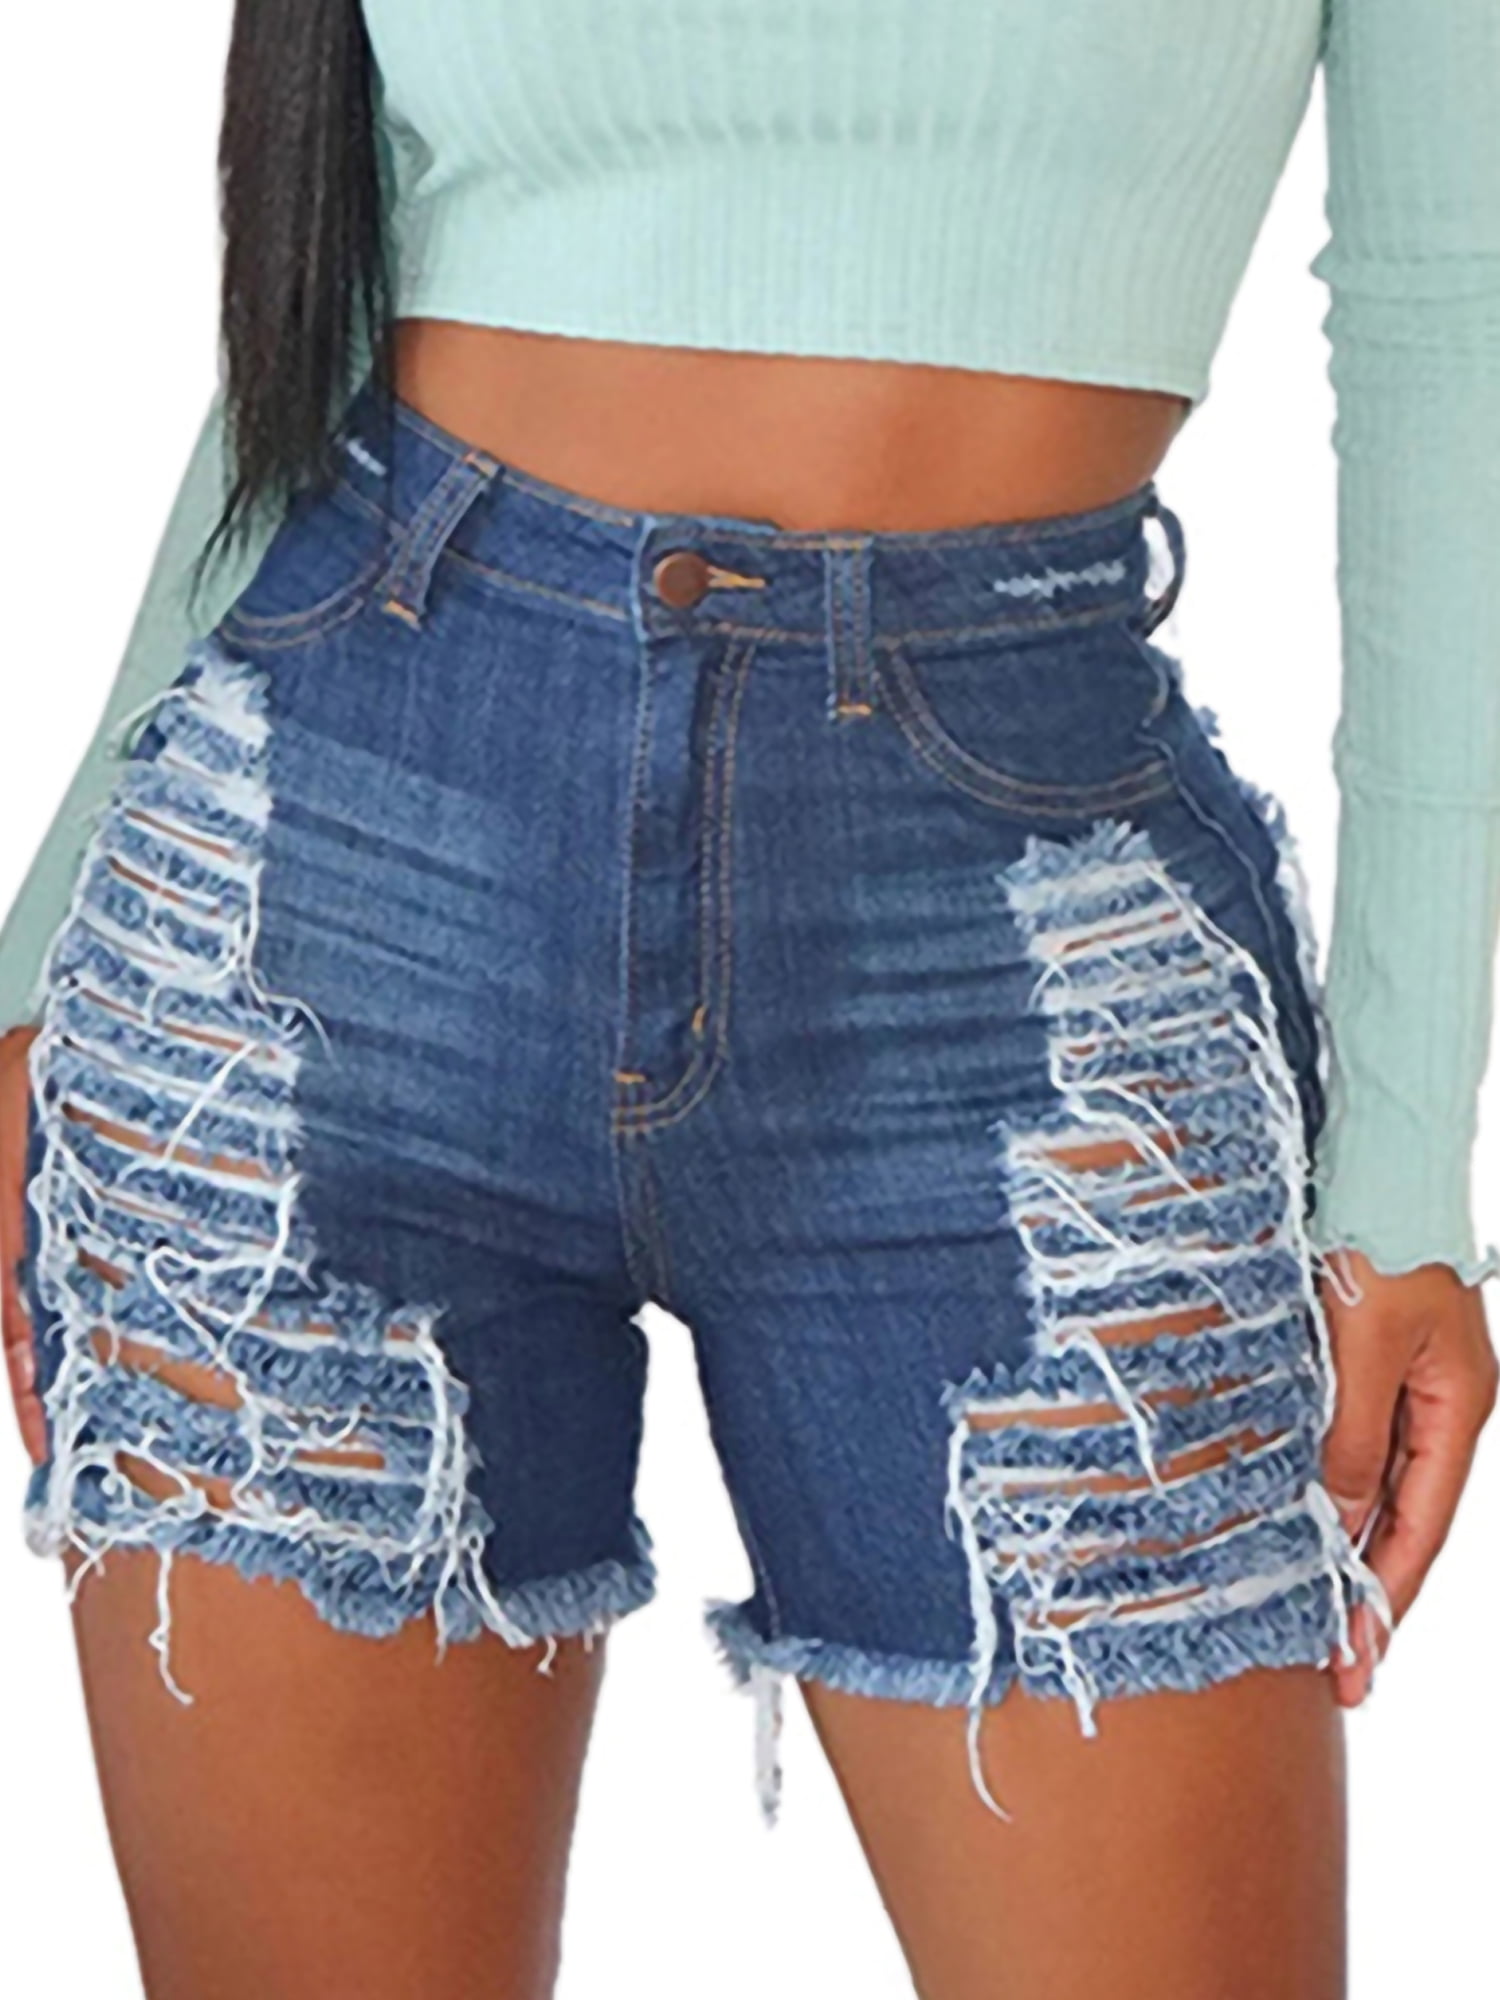 GCETTIC Jean Shorts for Women Distressed Ripped Denim Shorts Stretchy Frayed Raw Hem Casual Summer Short Pants with Pockets 